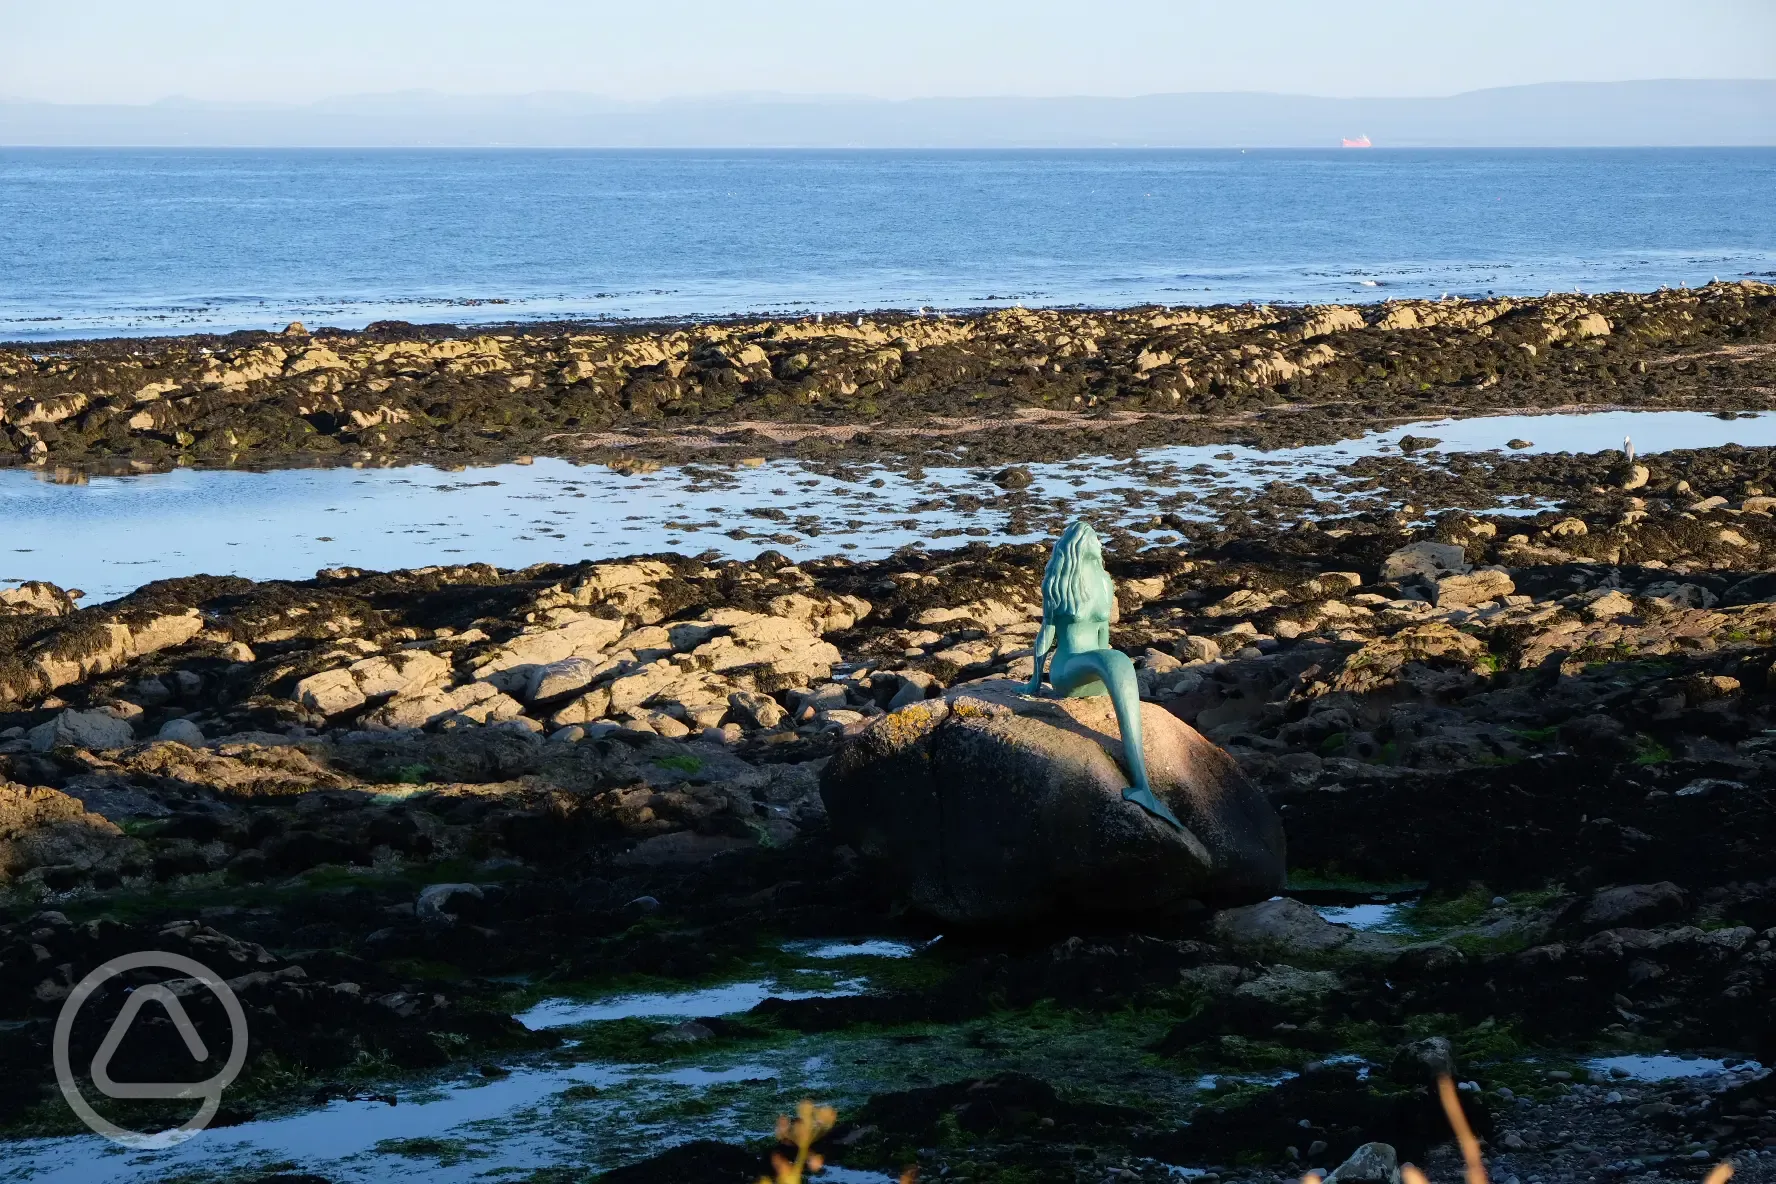 The Mermaid of the north at nearby Balintore